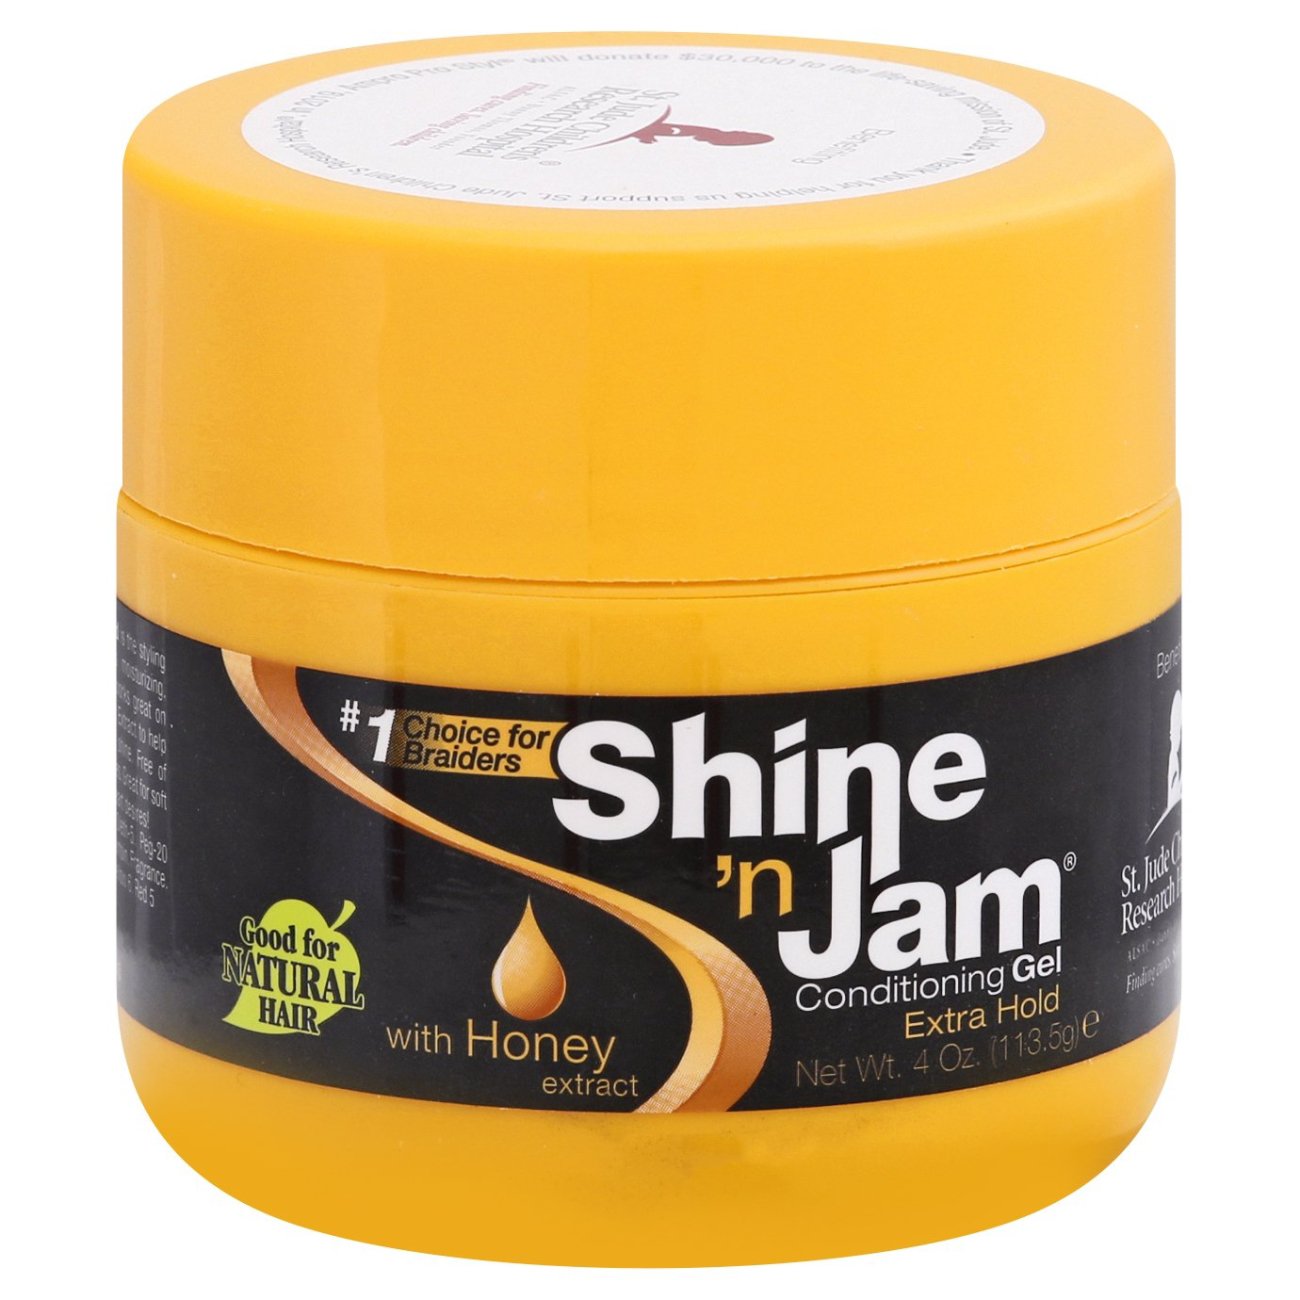 Ampro Pro Styl Shine N Jam Conditioning Gel Extra Hold Shop Styling Products Treatments At